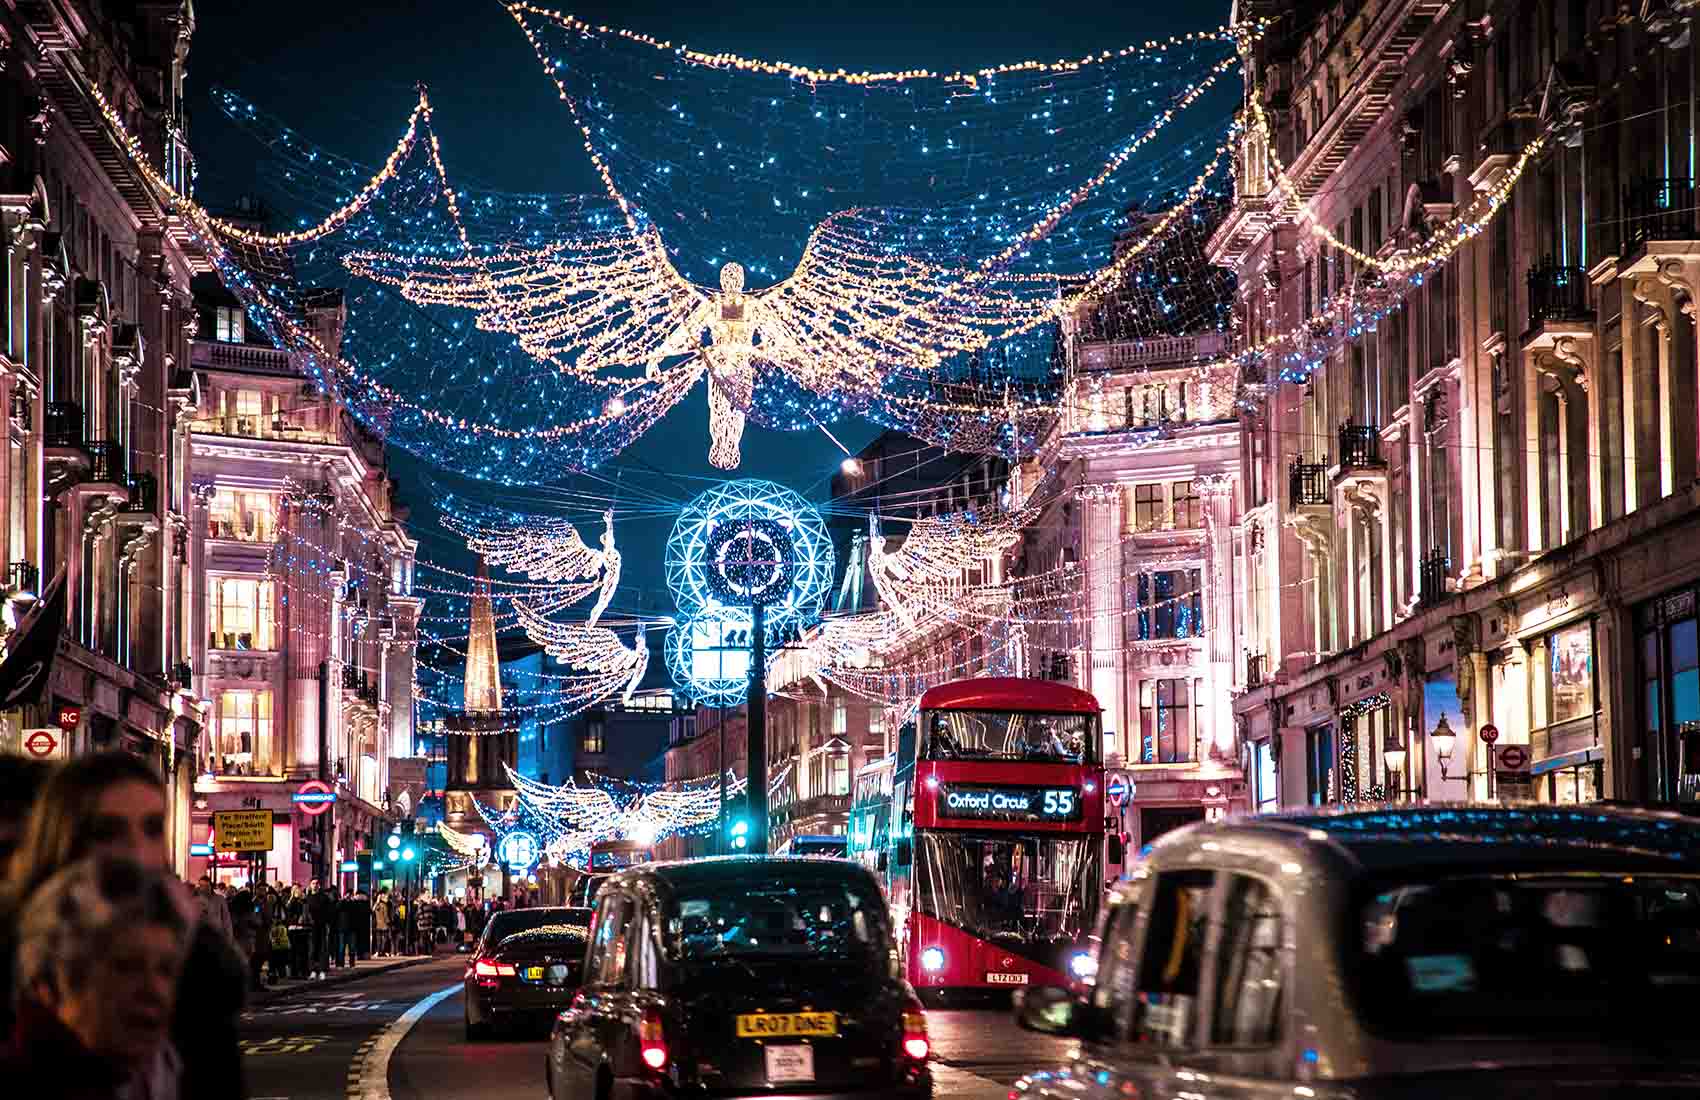 Coming to London in December? Enjoy the Christmas season with an array of things to do, shows to watch and tours and experiences to enjoy.